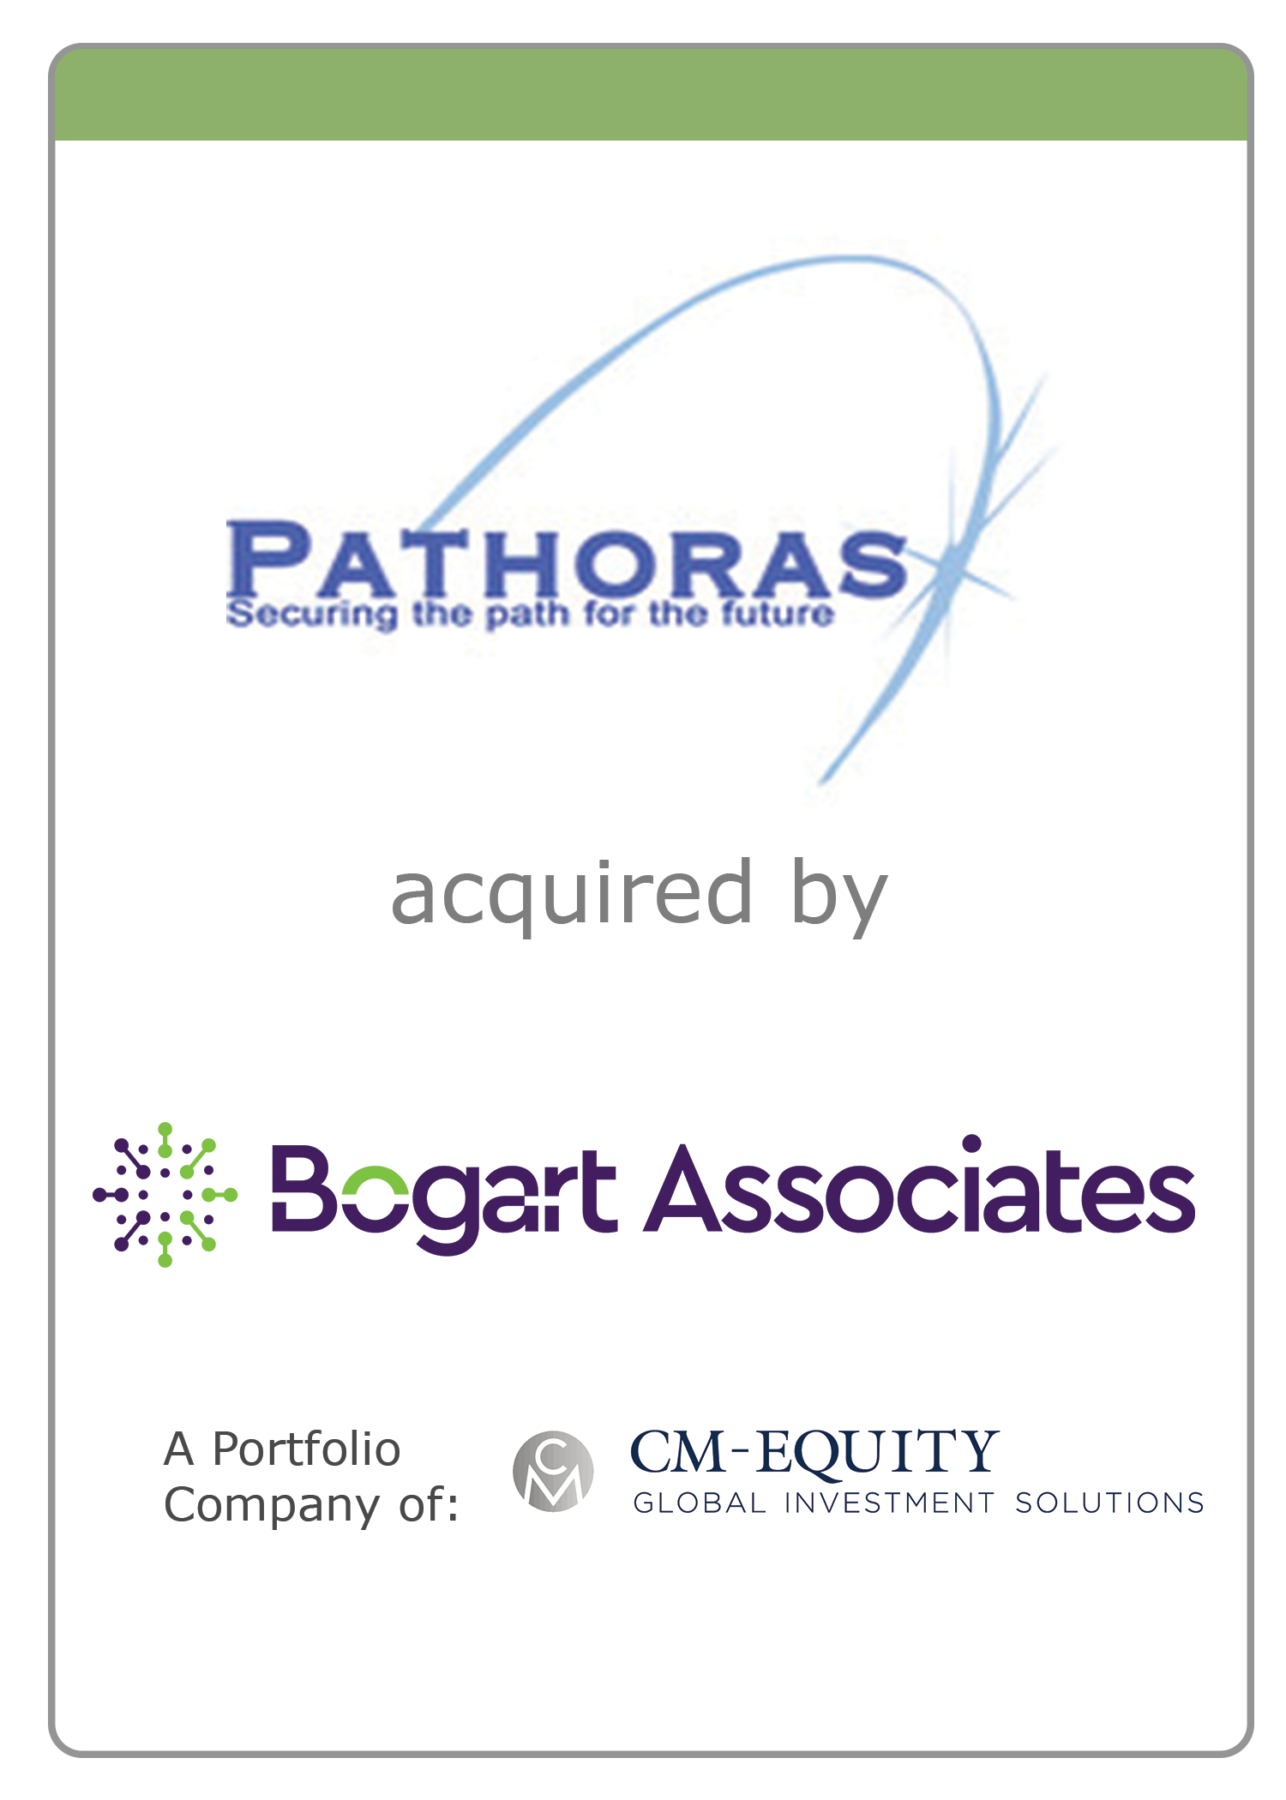 Pathoras acquired by Bogart Associates